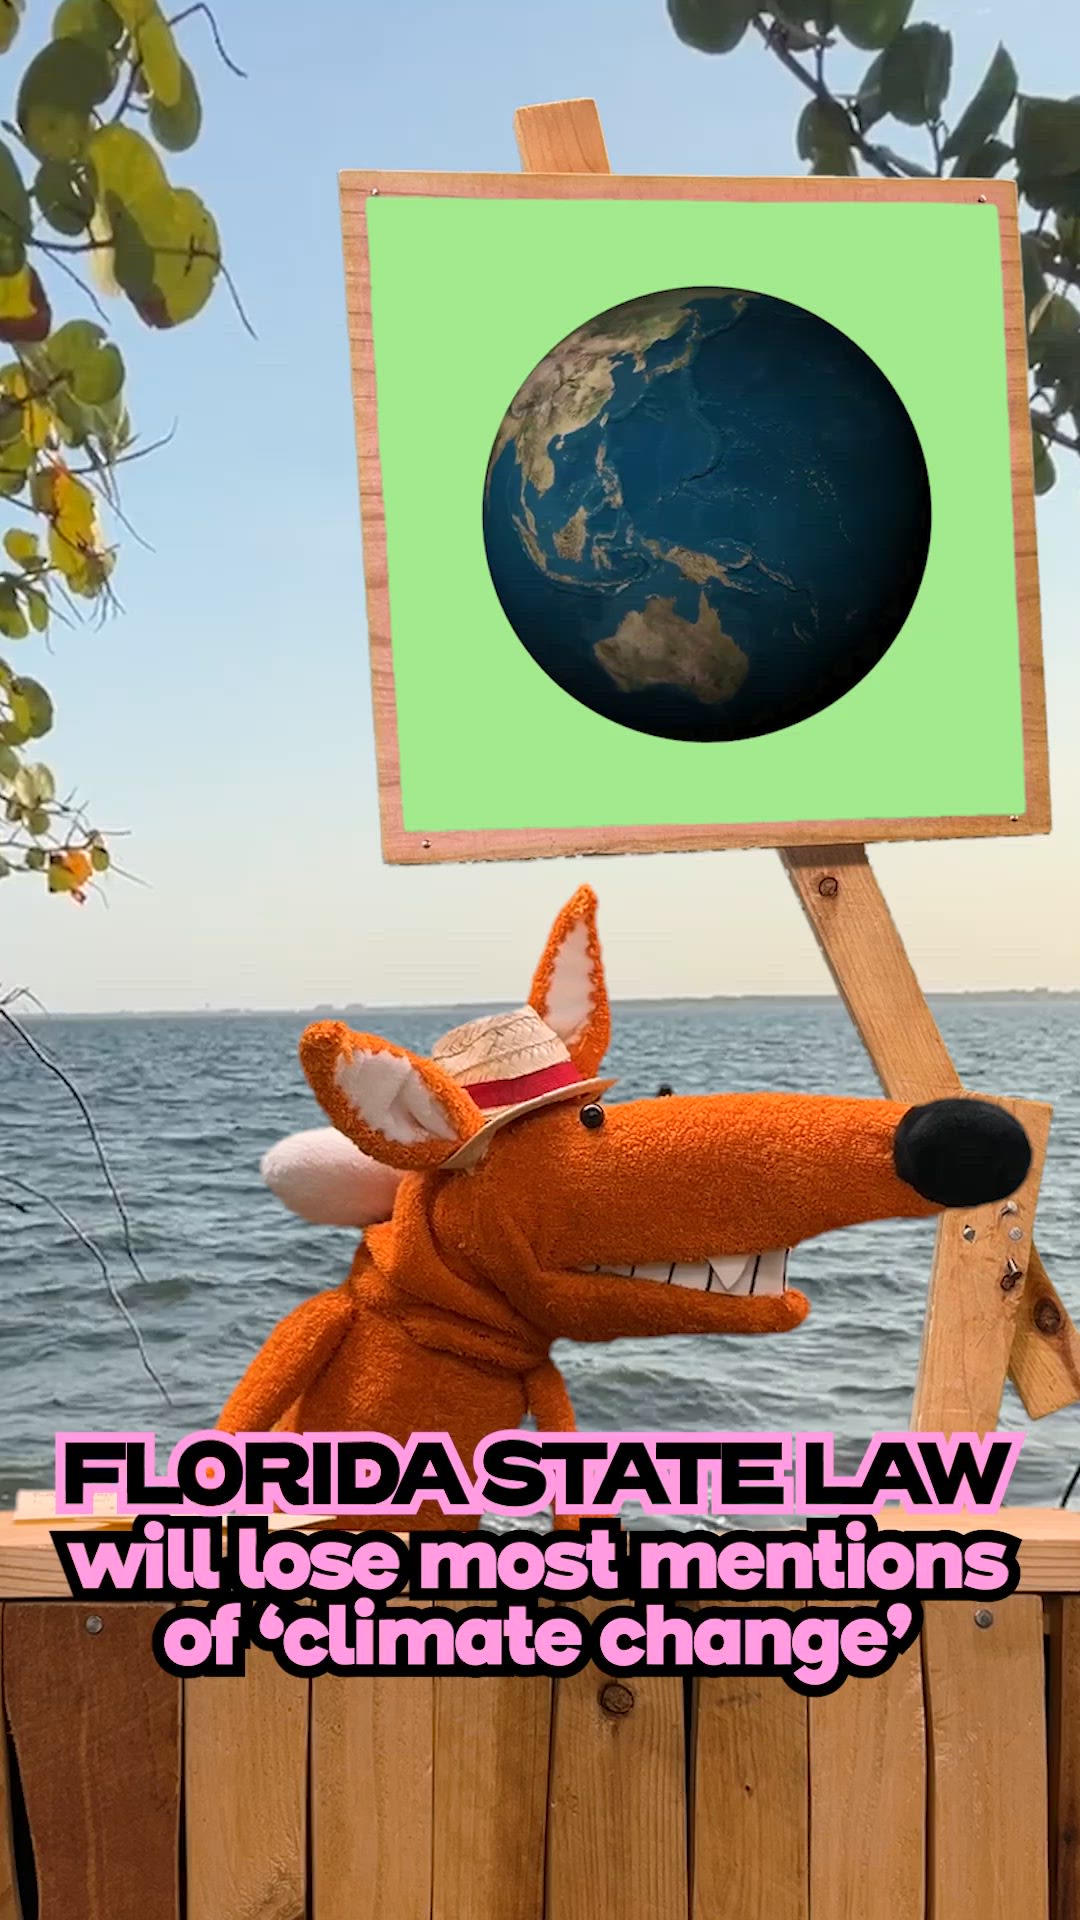 Florida is removing 'climate change' from state law